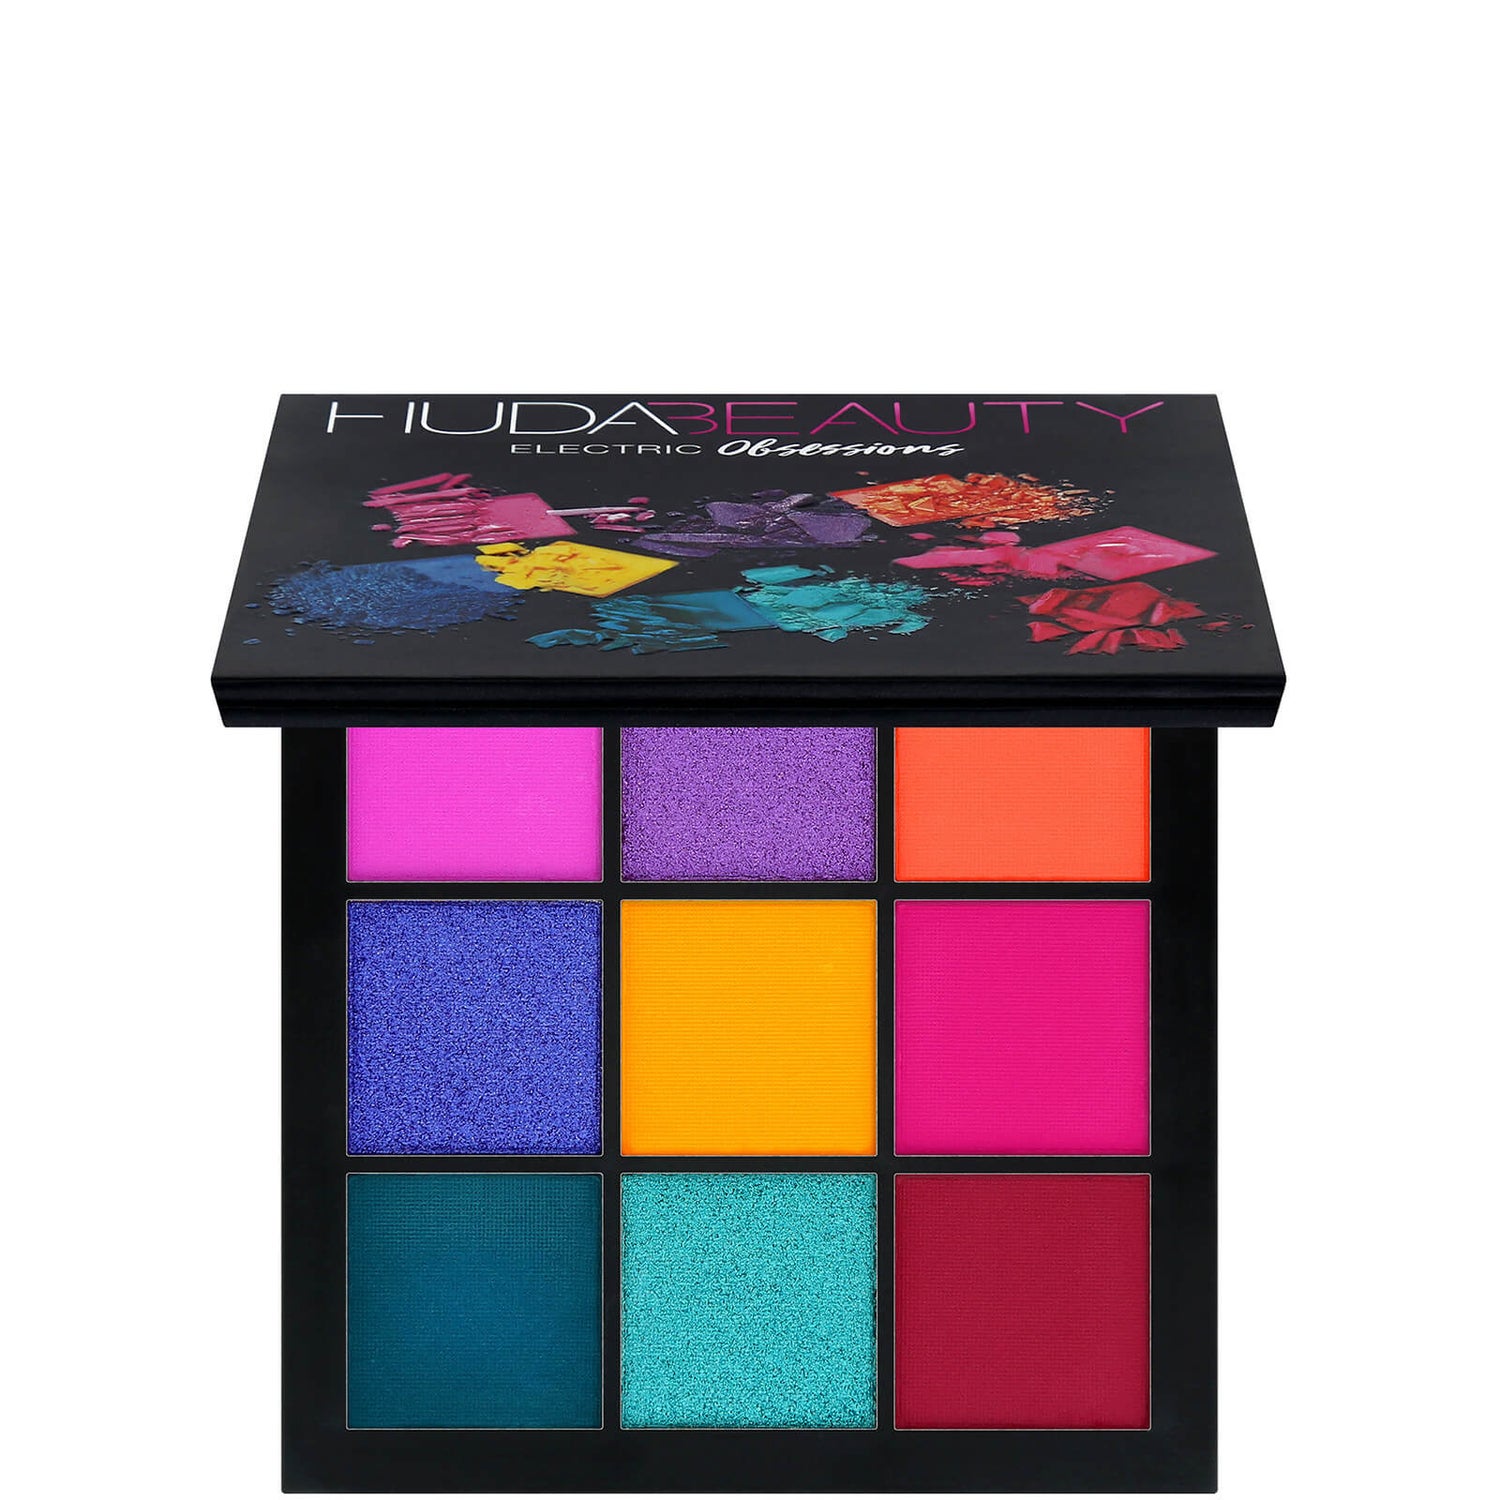 Huda Beauty Electric Obsessions Palette